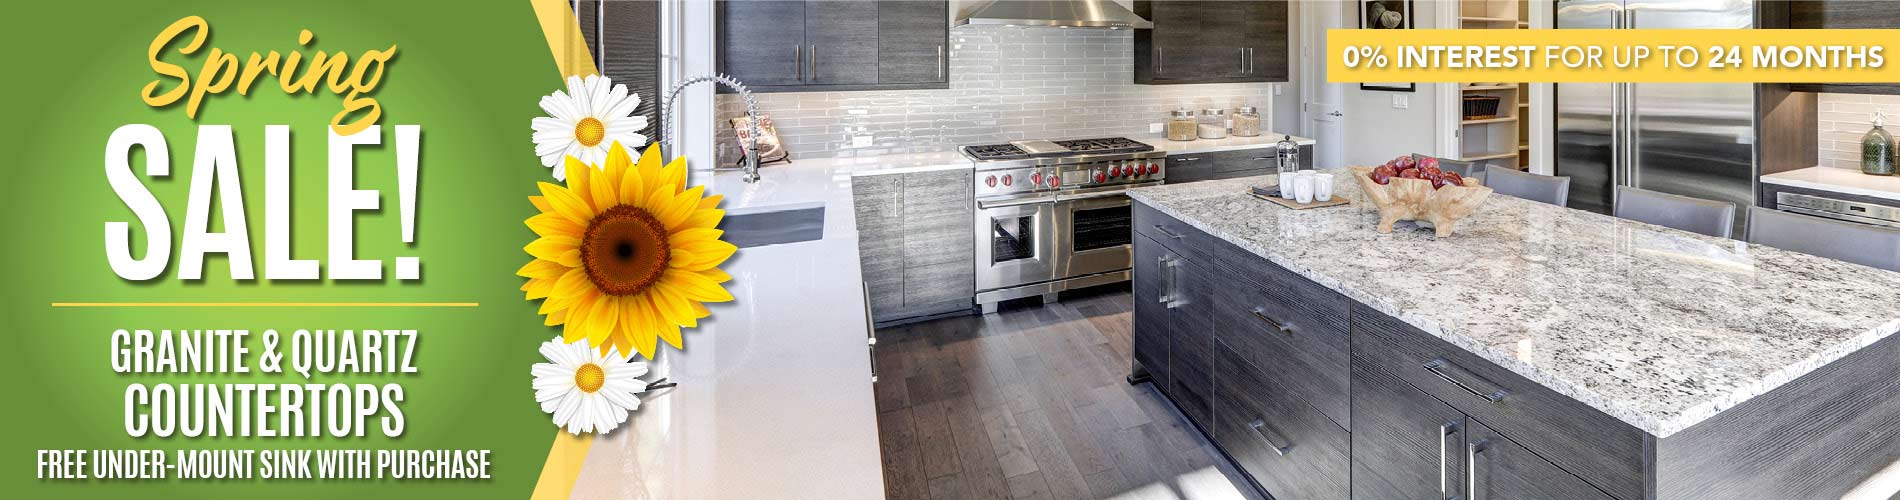 Save on Granite and quartz countertops. Free under-mount sink with purchase